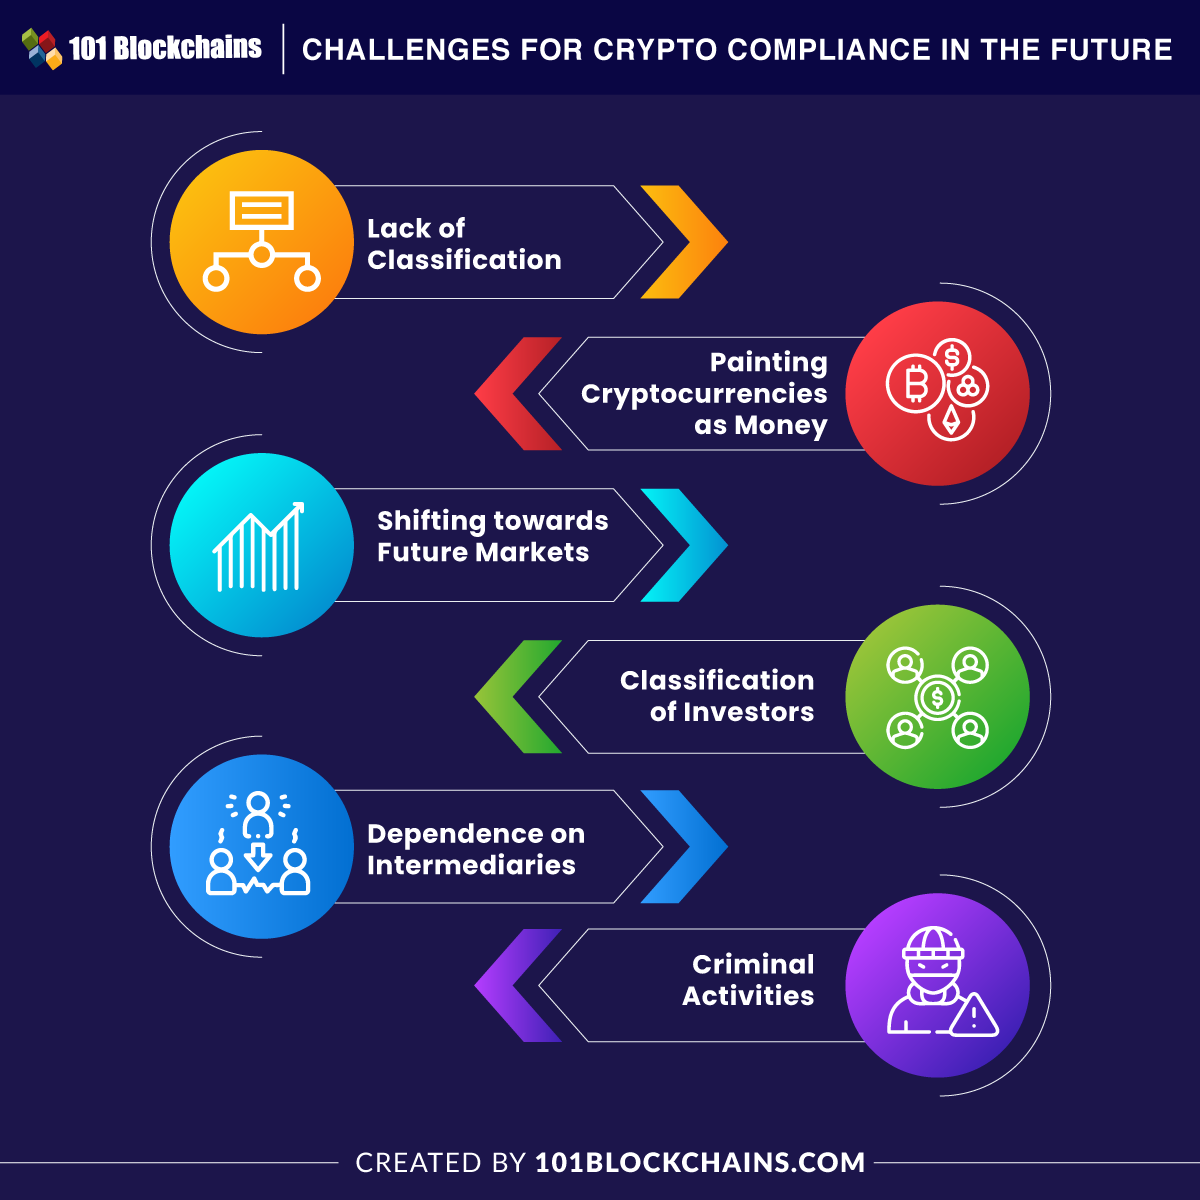 Challenges for Crypto Compliance in the Future